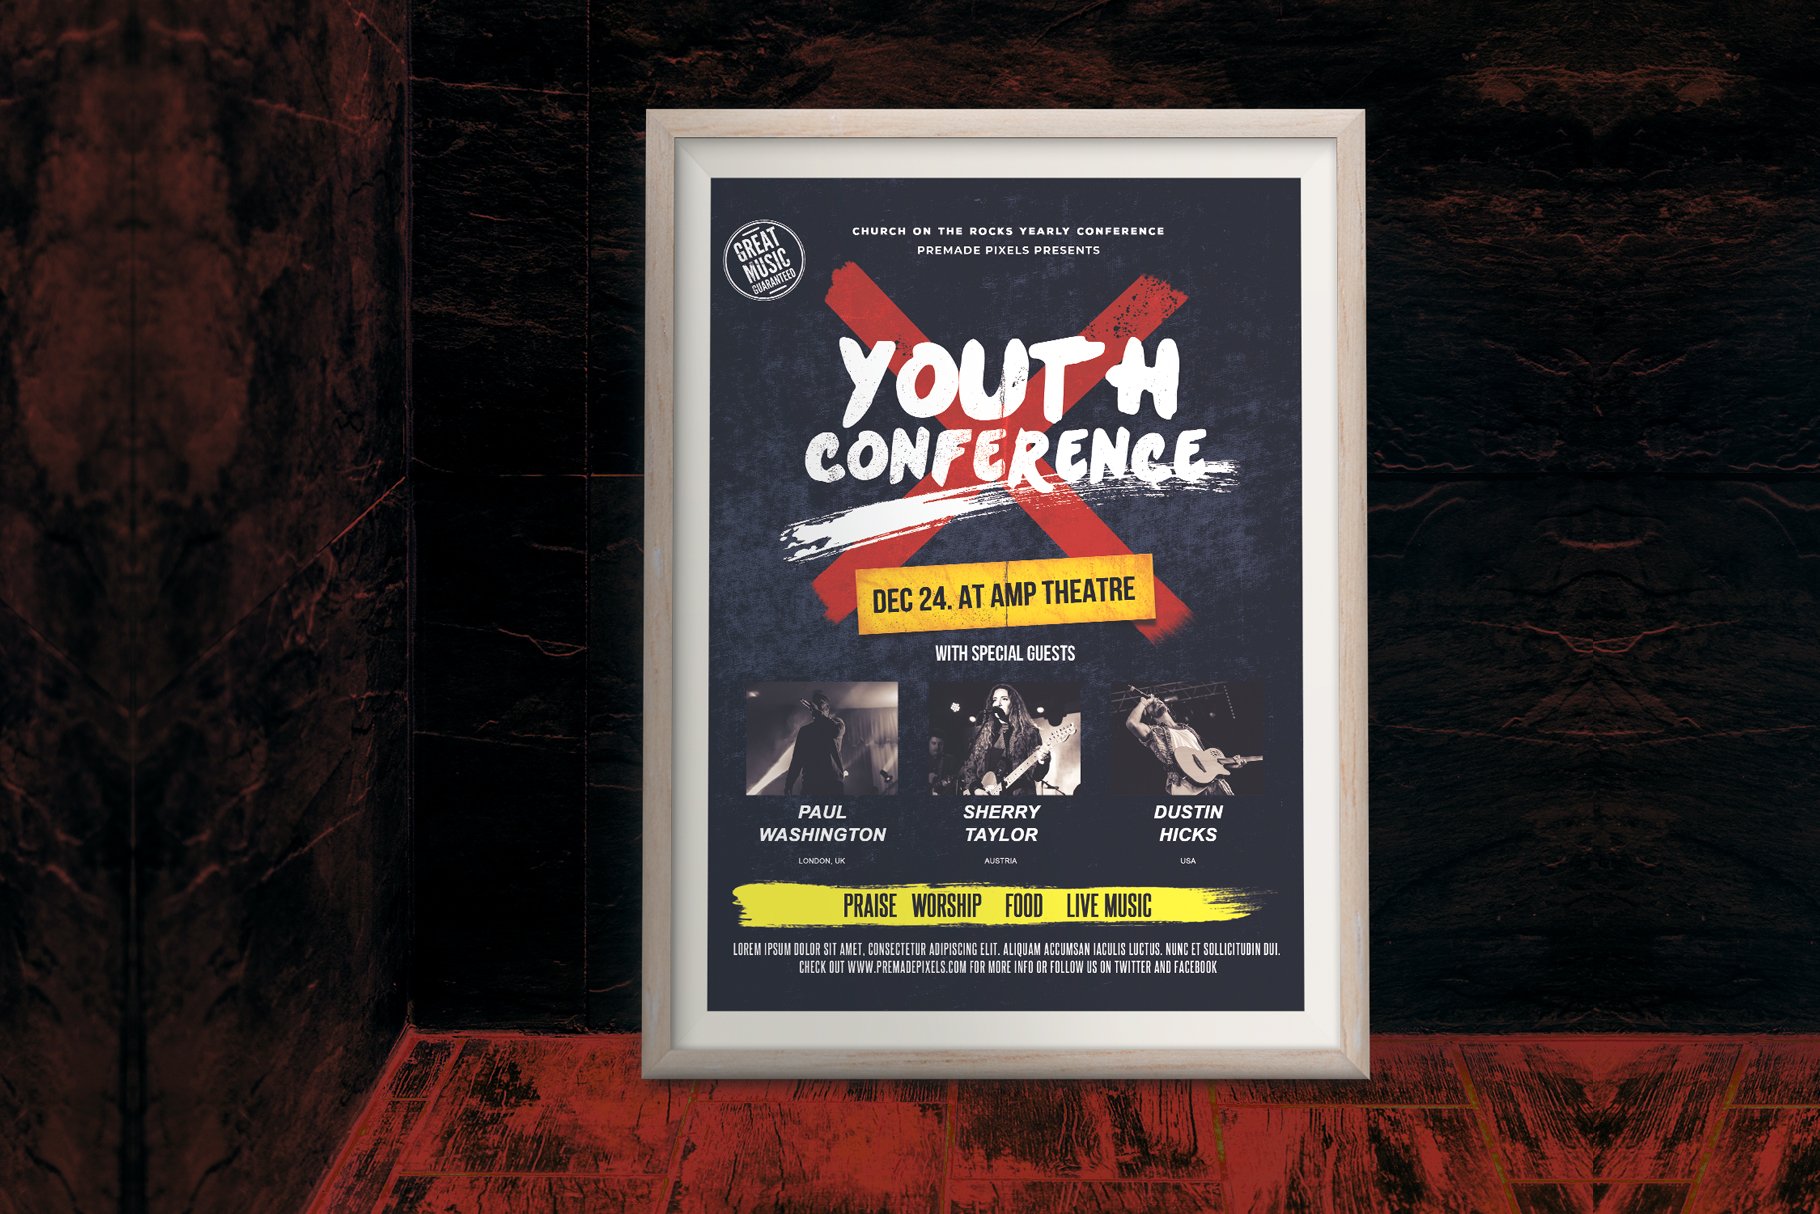 Youth Conference Flyer cover image.